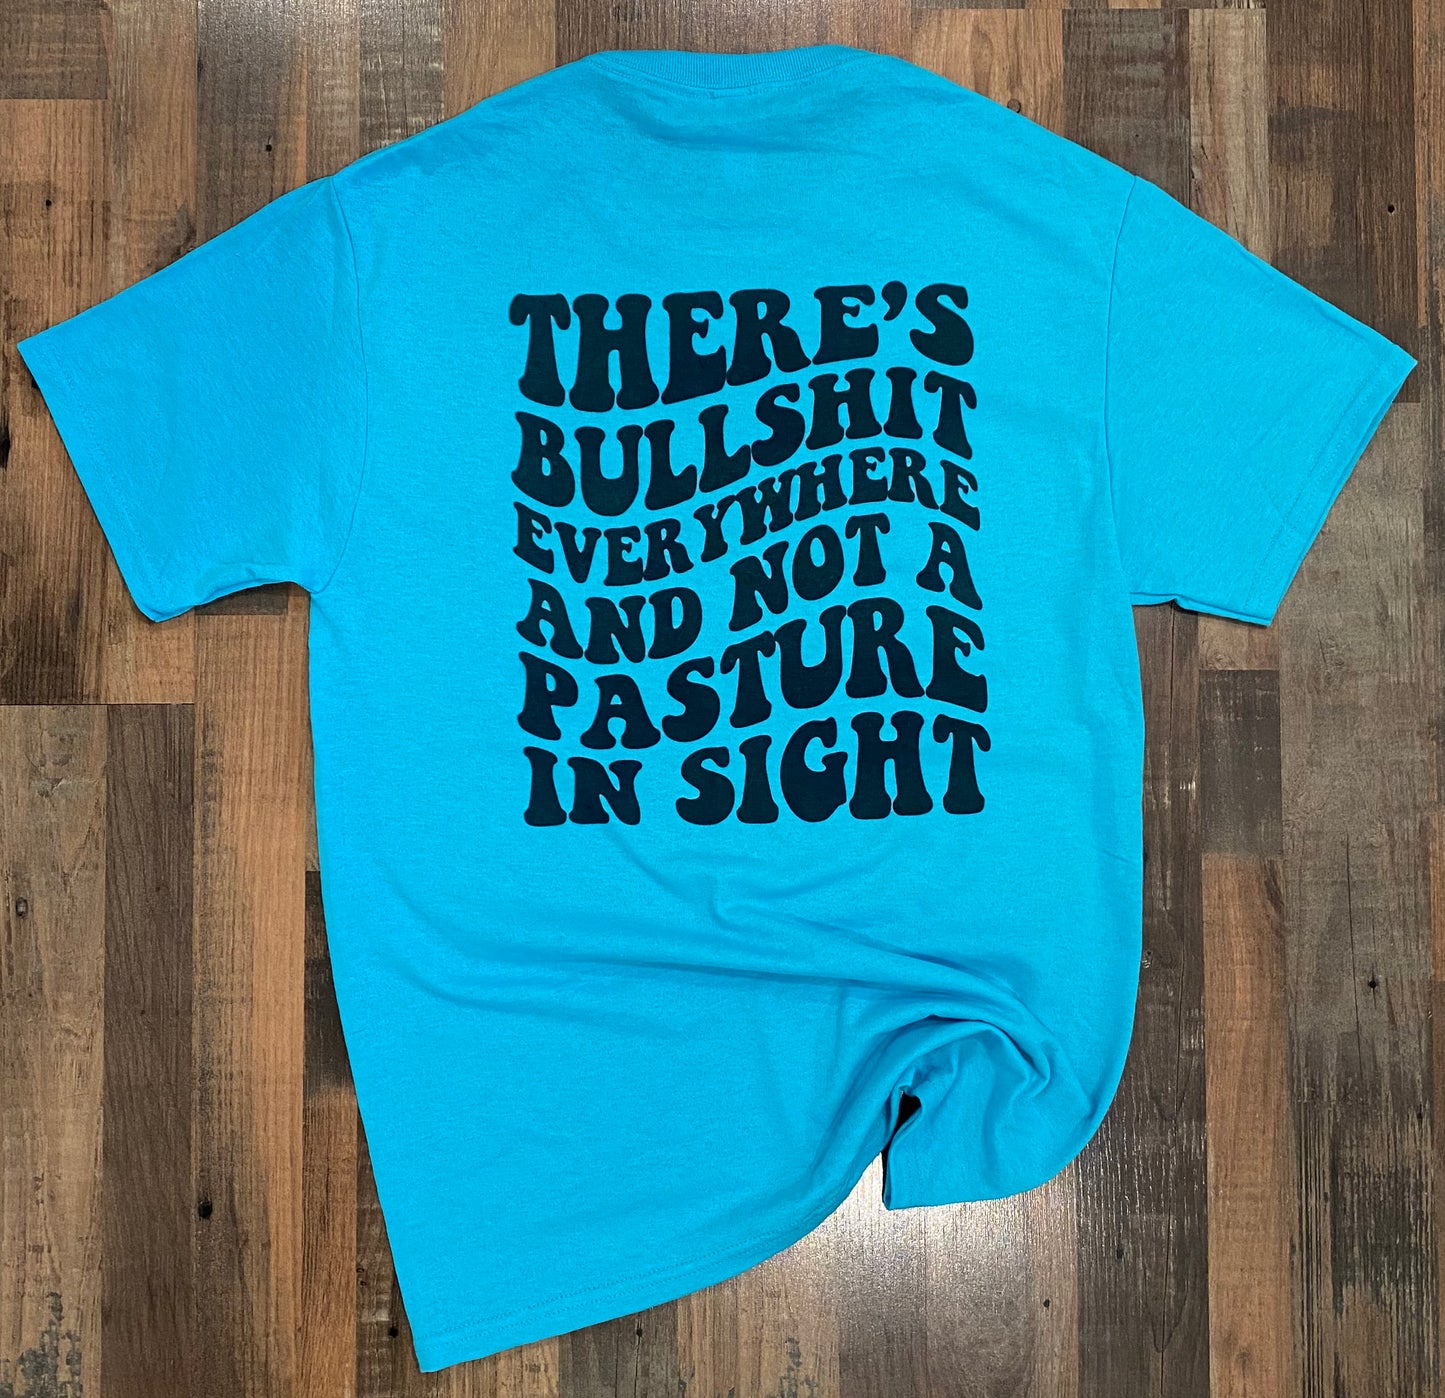 NOT A PASTURE IN SIGHT TEE